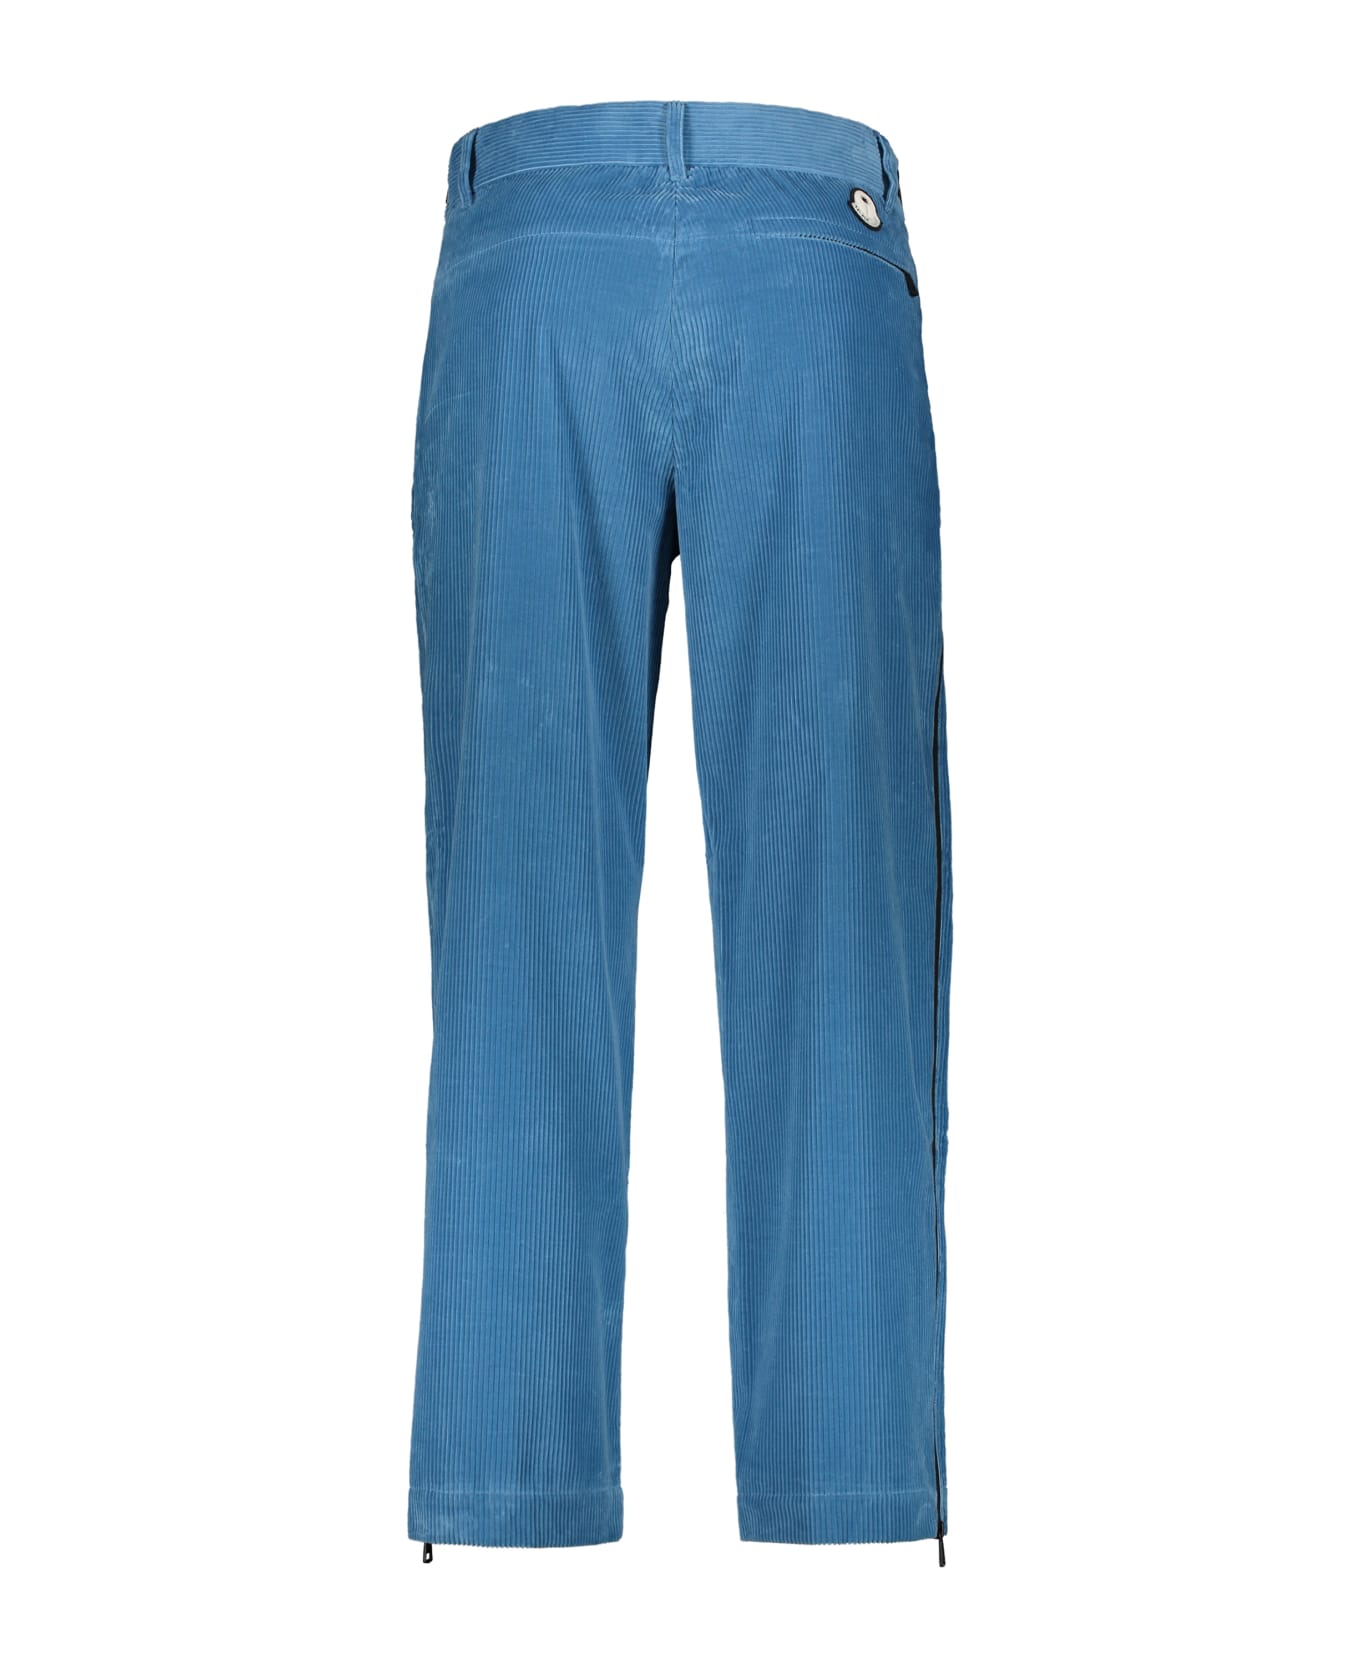 Palm Angels Moncler X Palm Angels Corduroy Trousers - turquoise